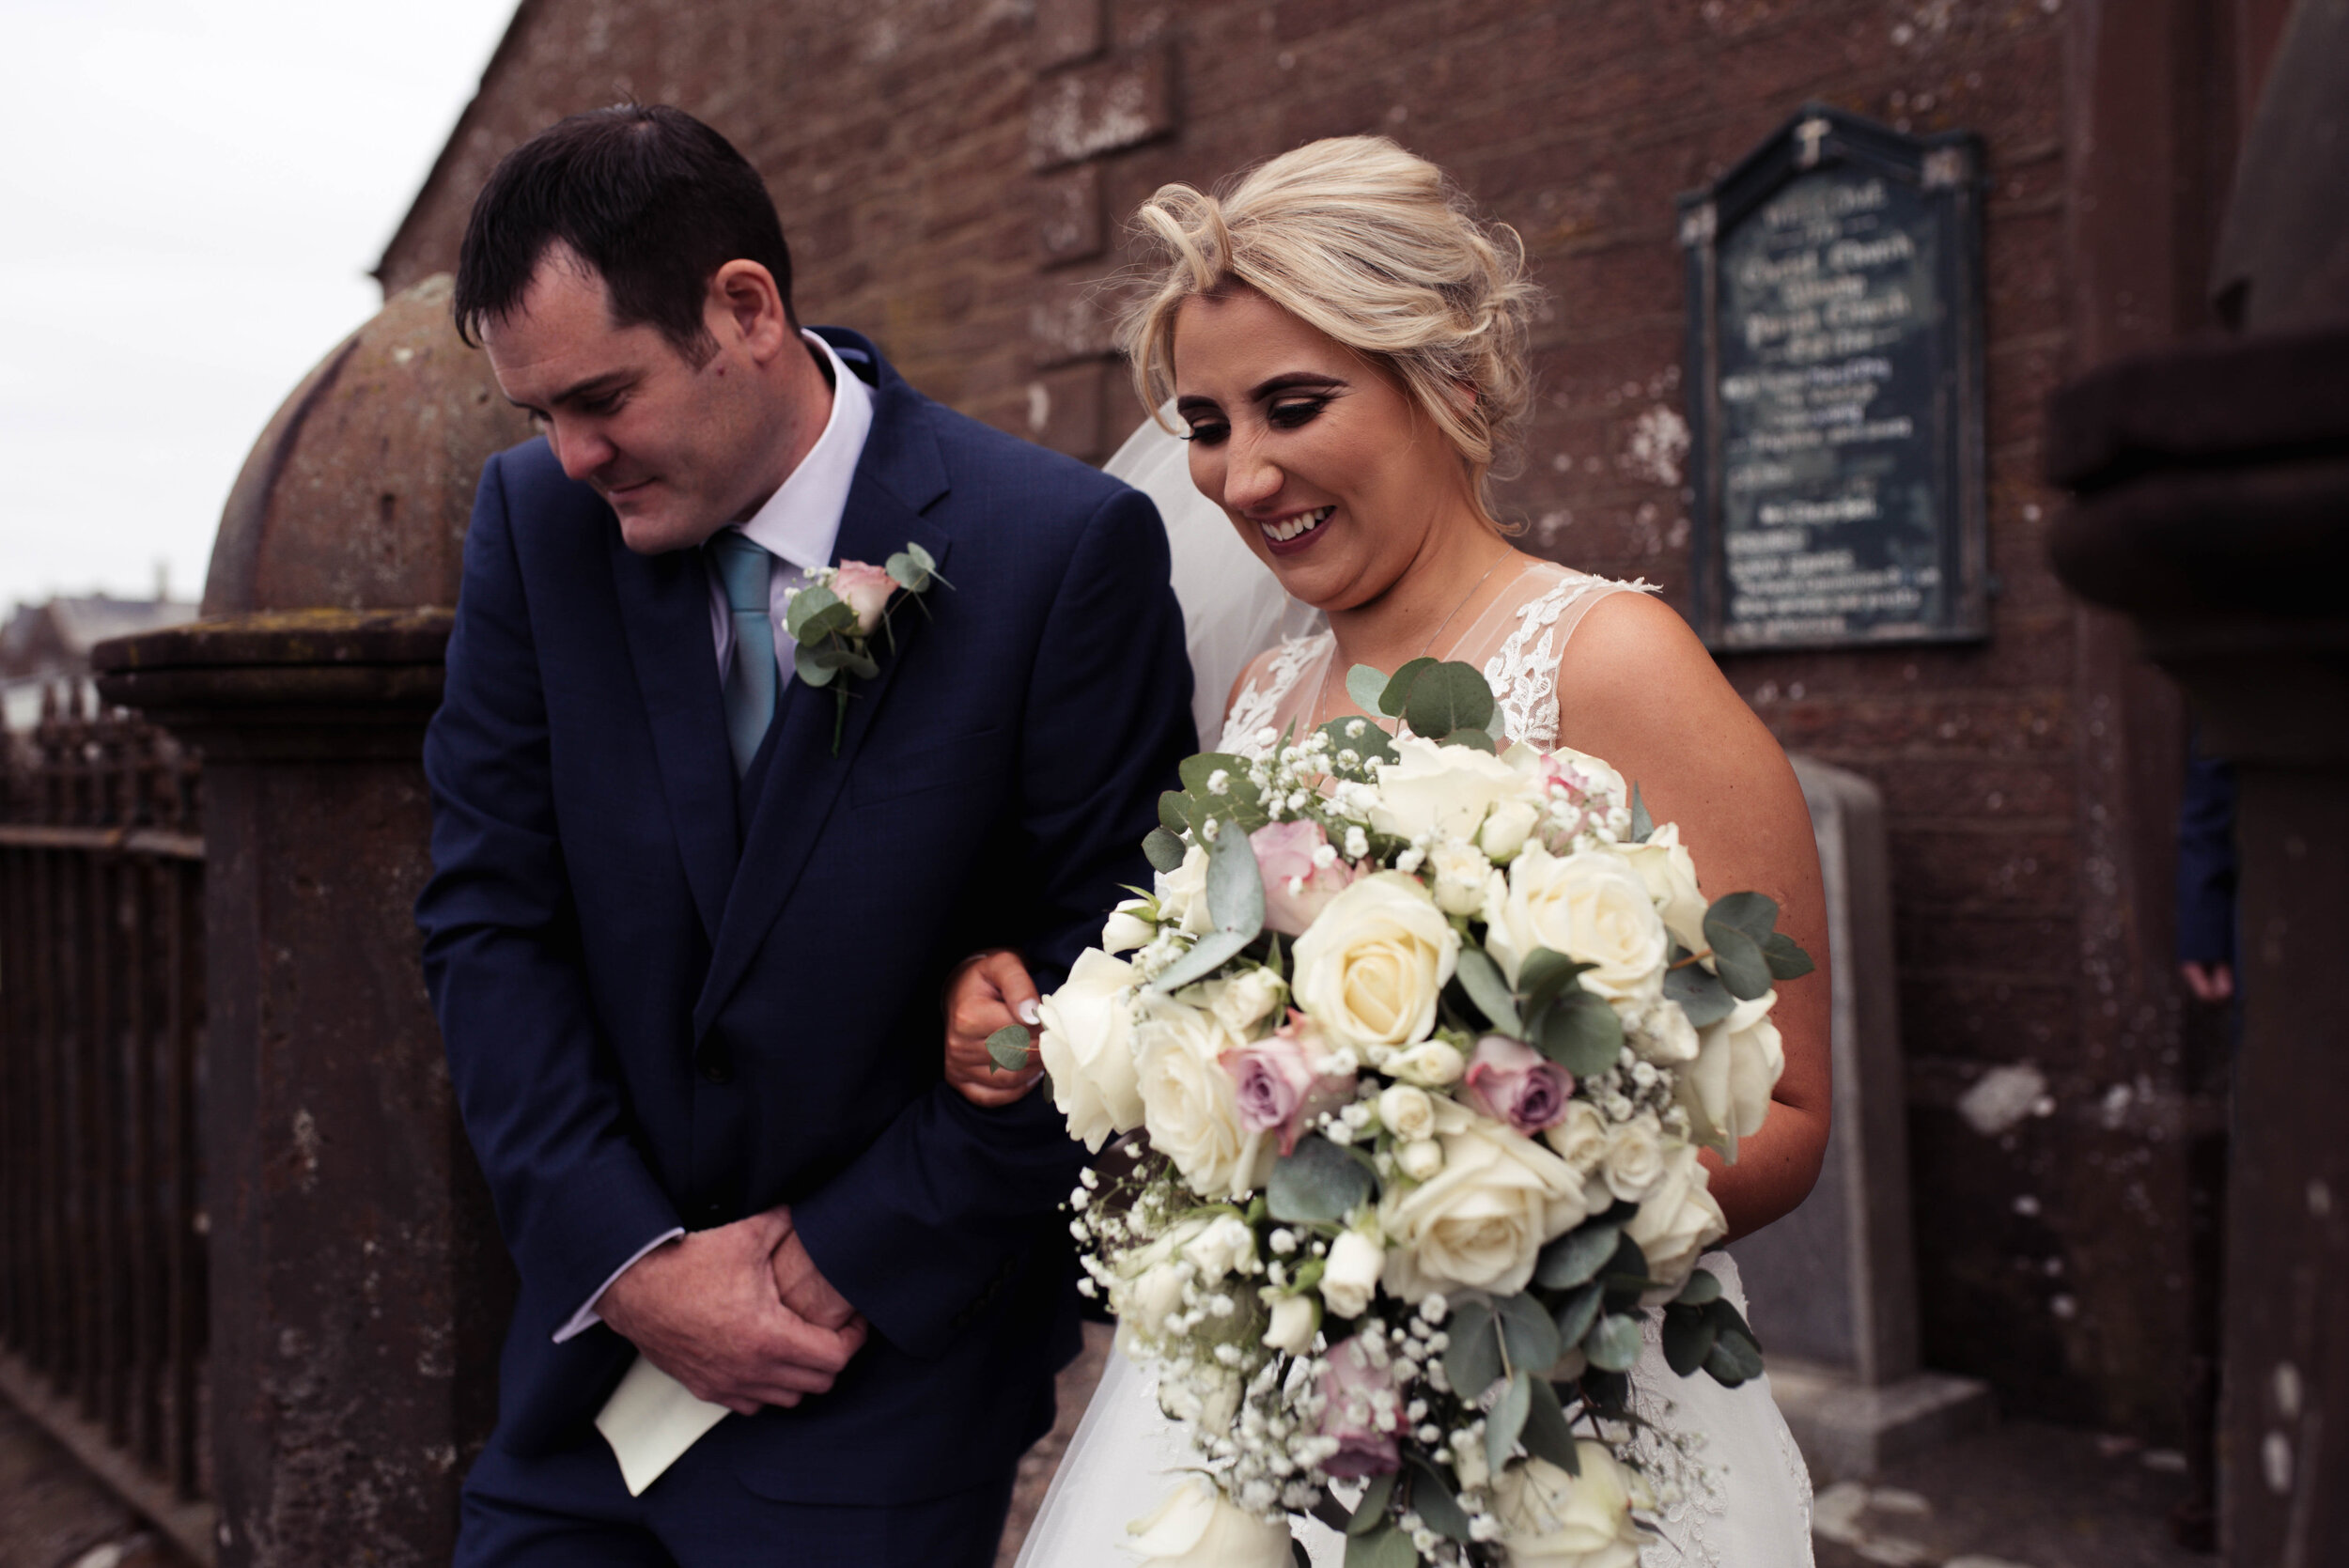 The bride and groom step out of their Cumbria church